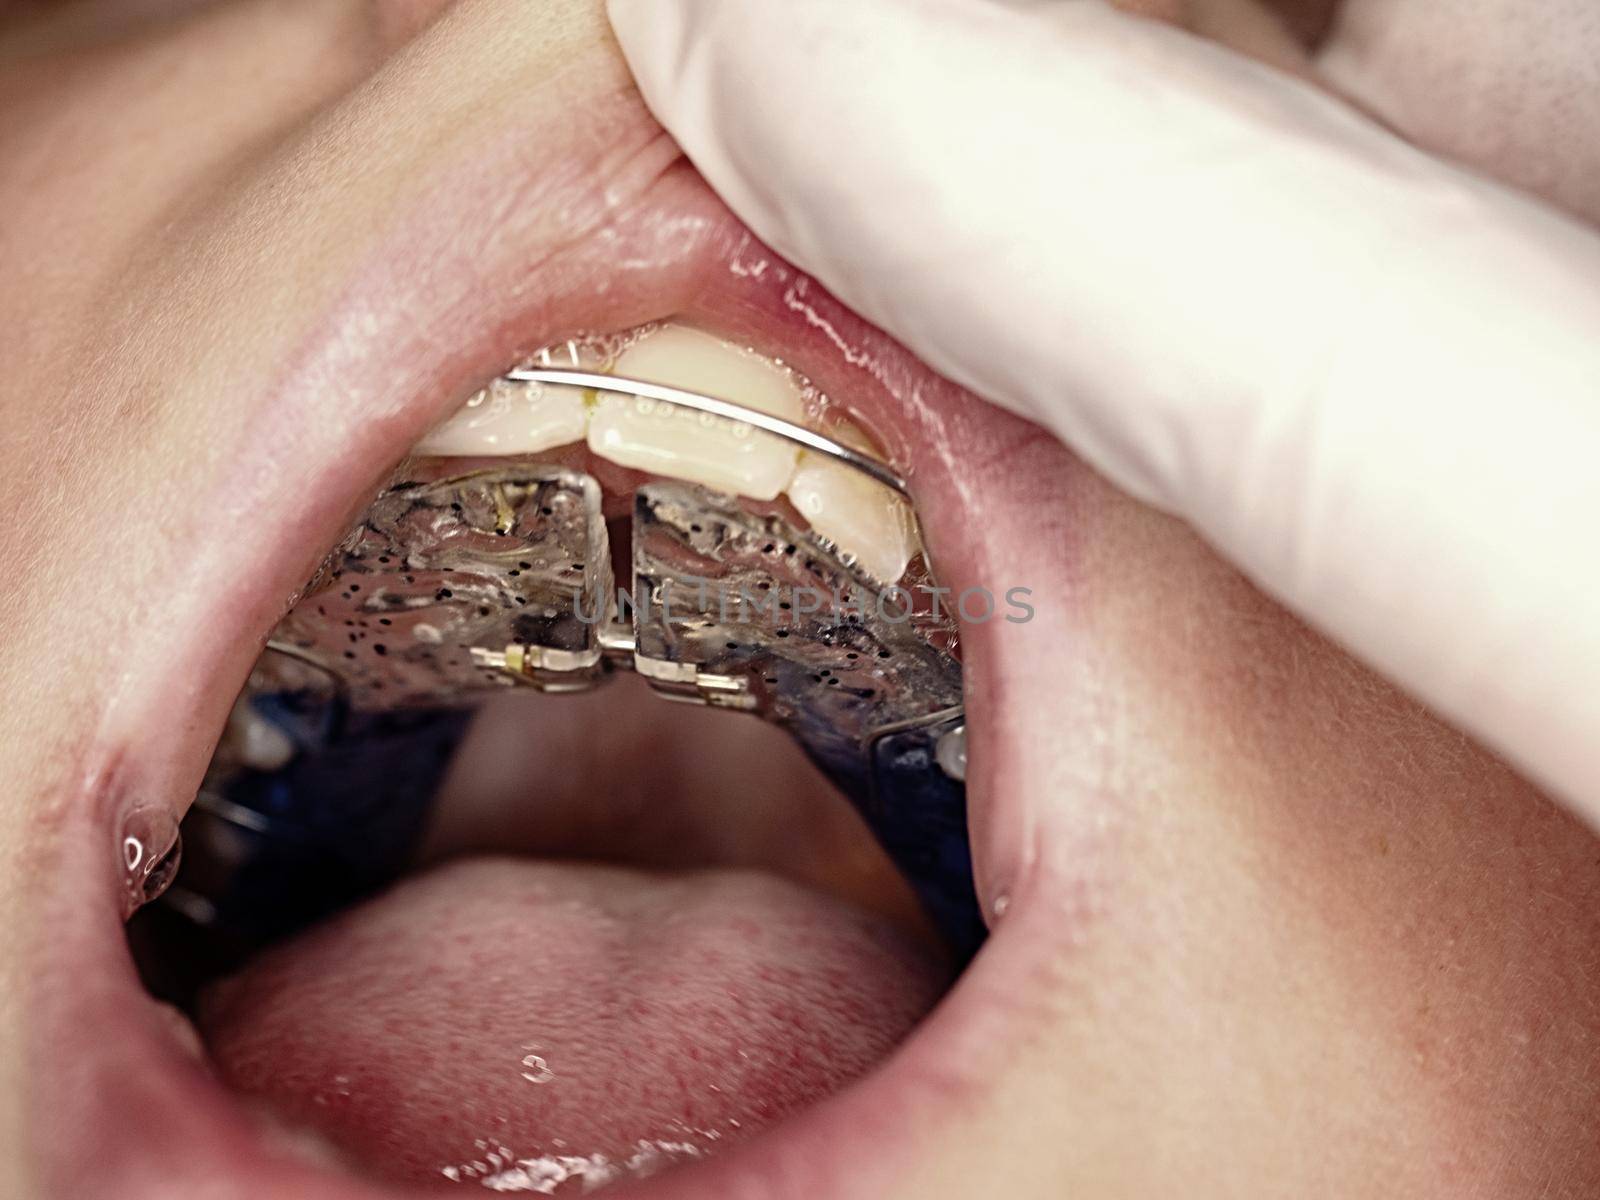 Orthodontist inserting ligatures into children mouth, orthodontic appliance. Boy holds open mouth